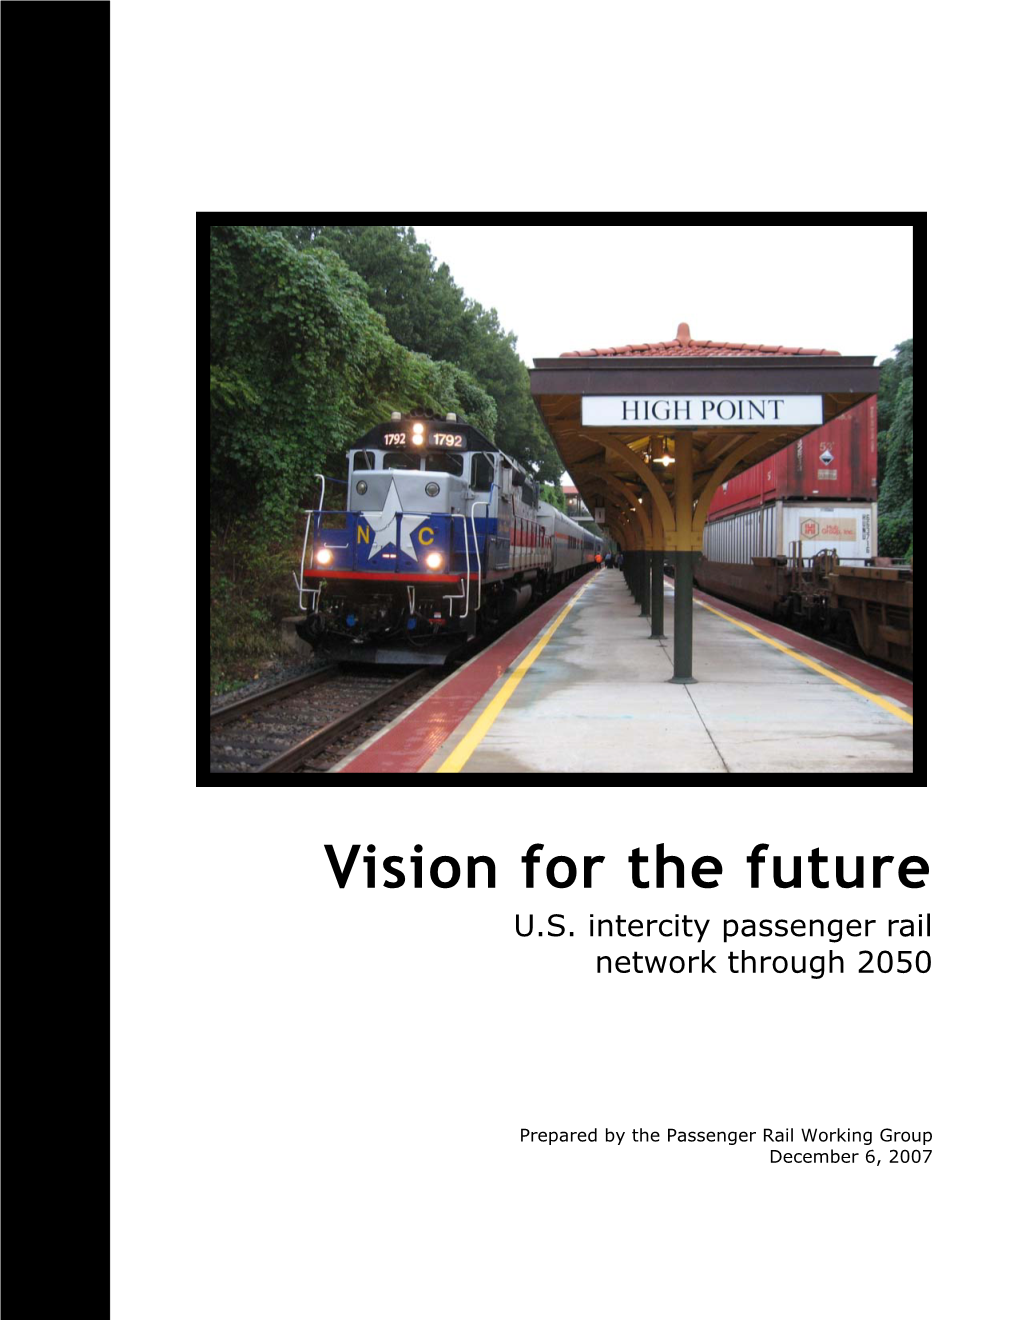 Vision for the Future U.S